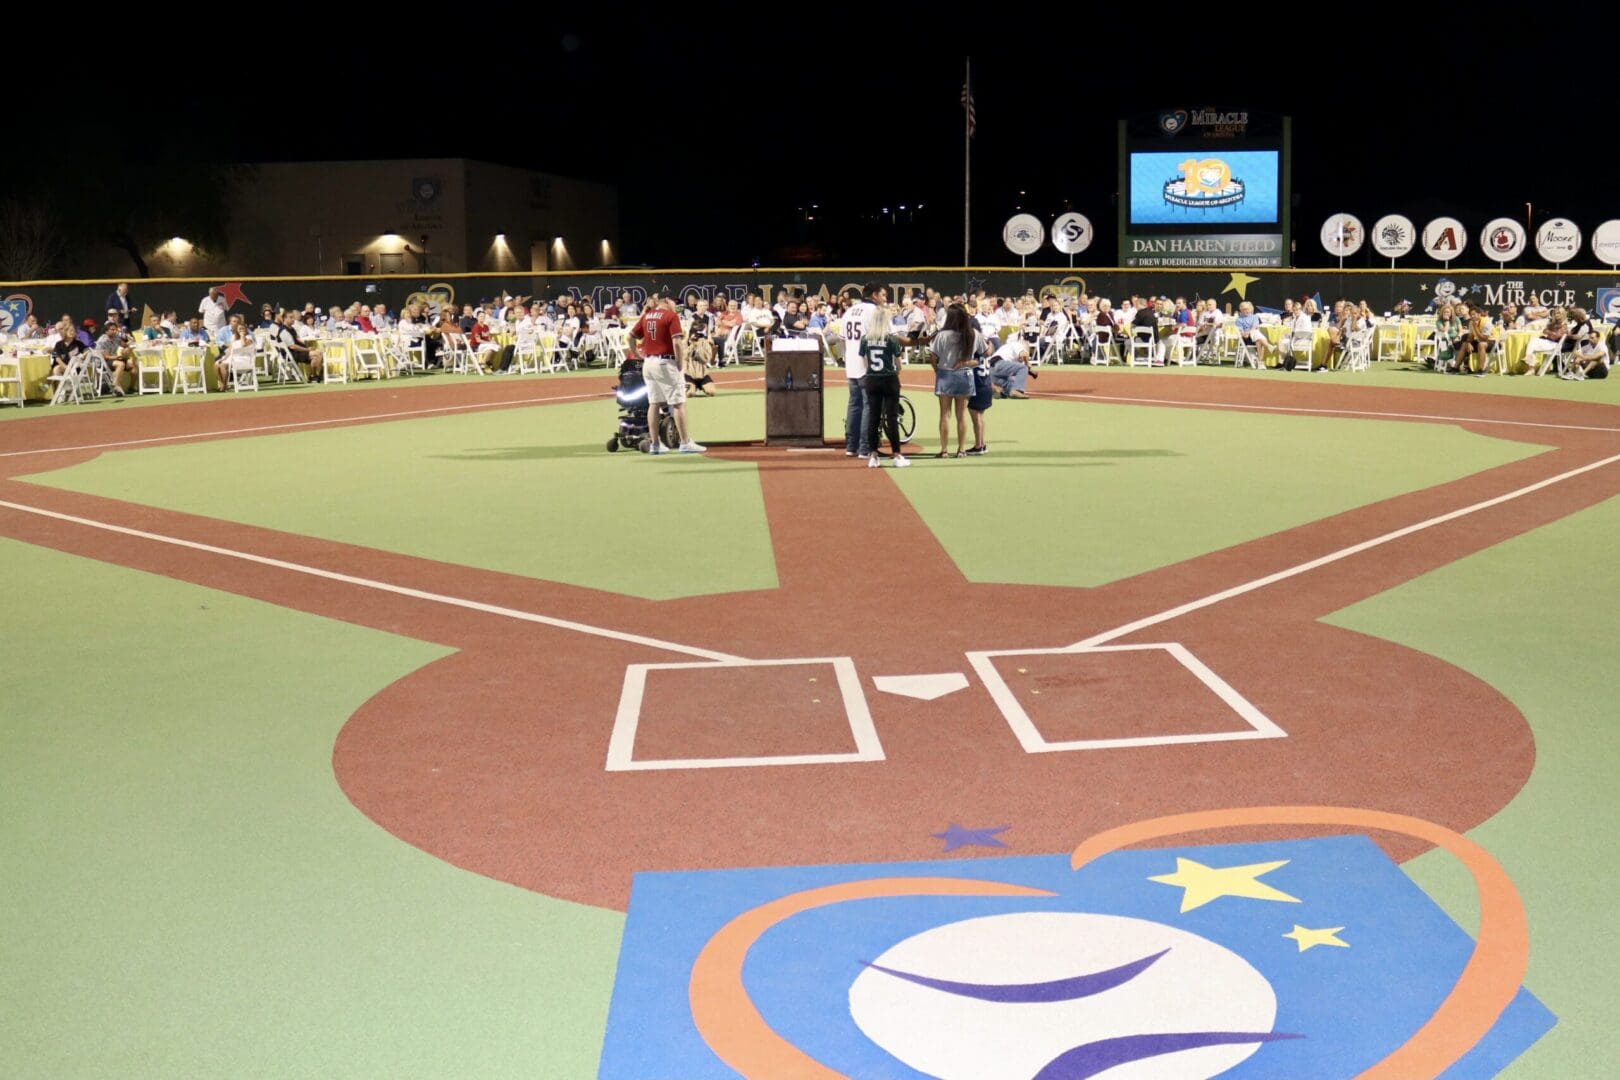 A group of people standing on a baseball field.